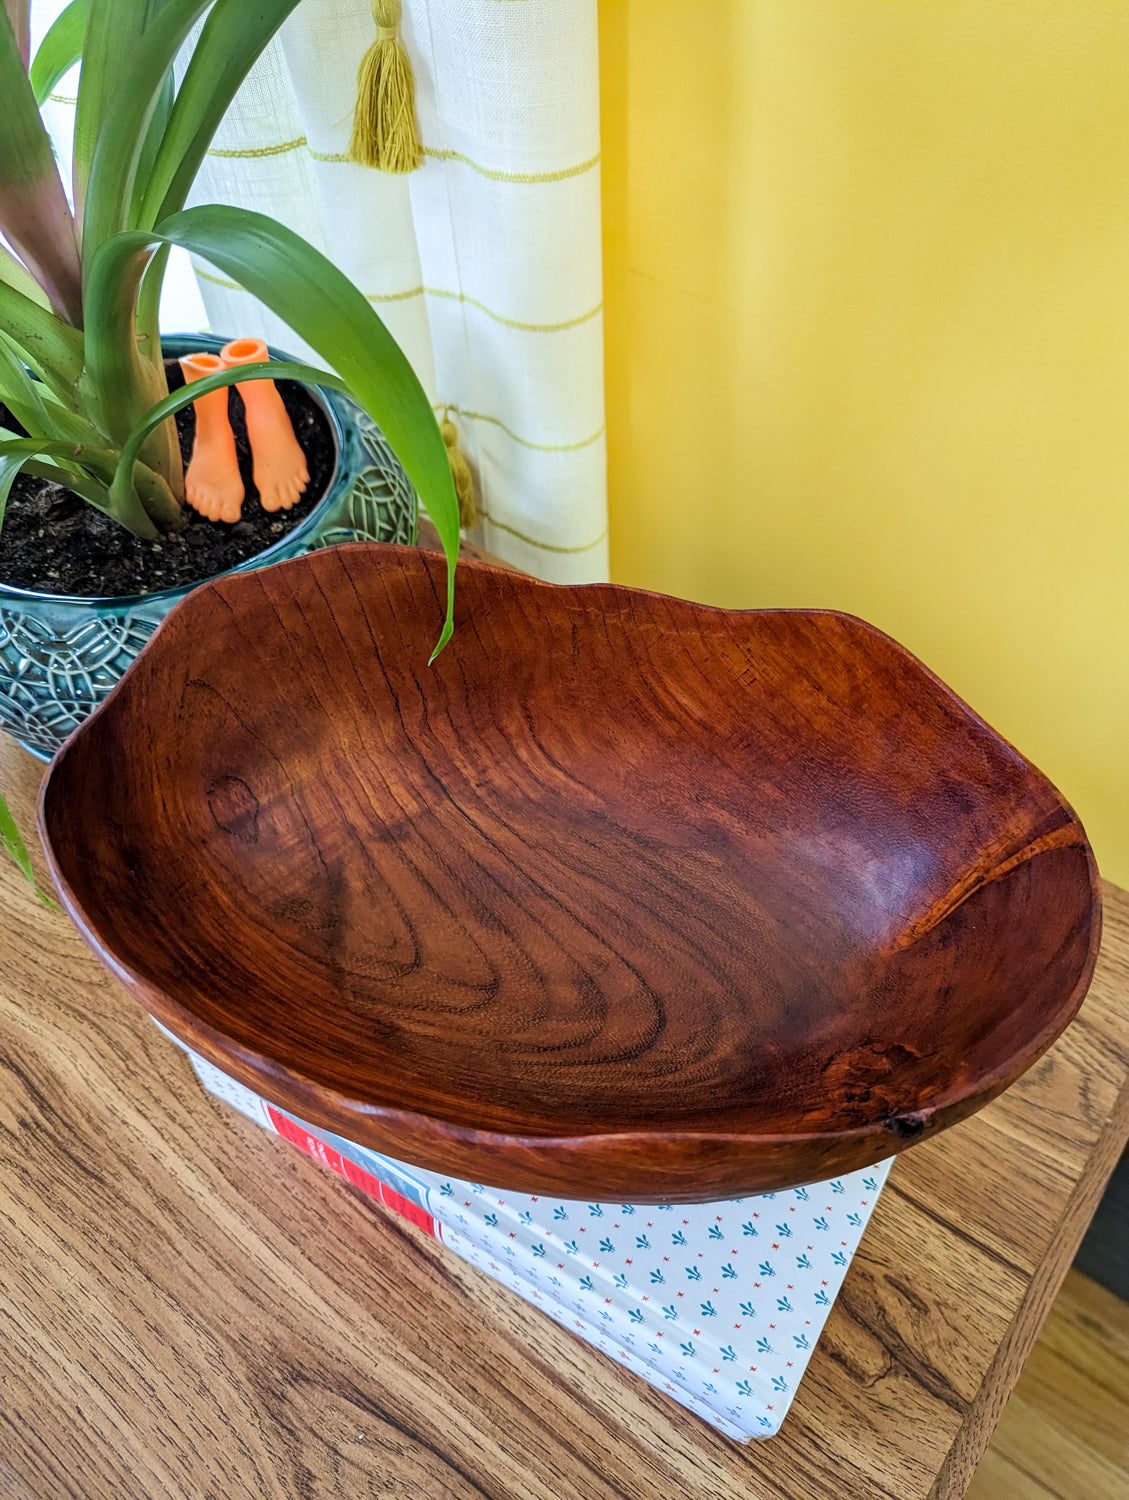 A Really Great Wooden Bowl